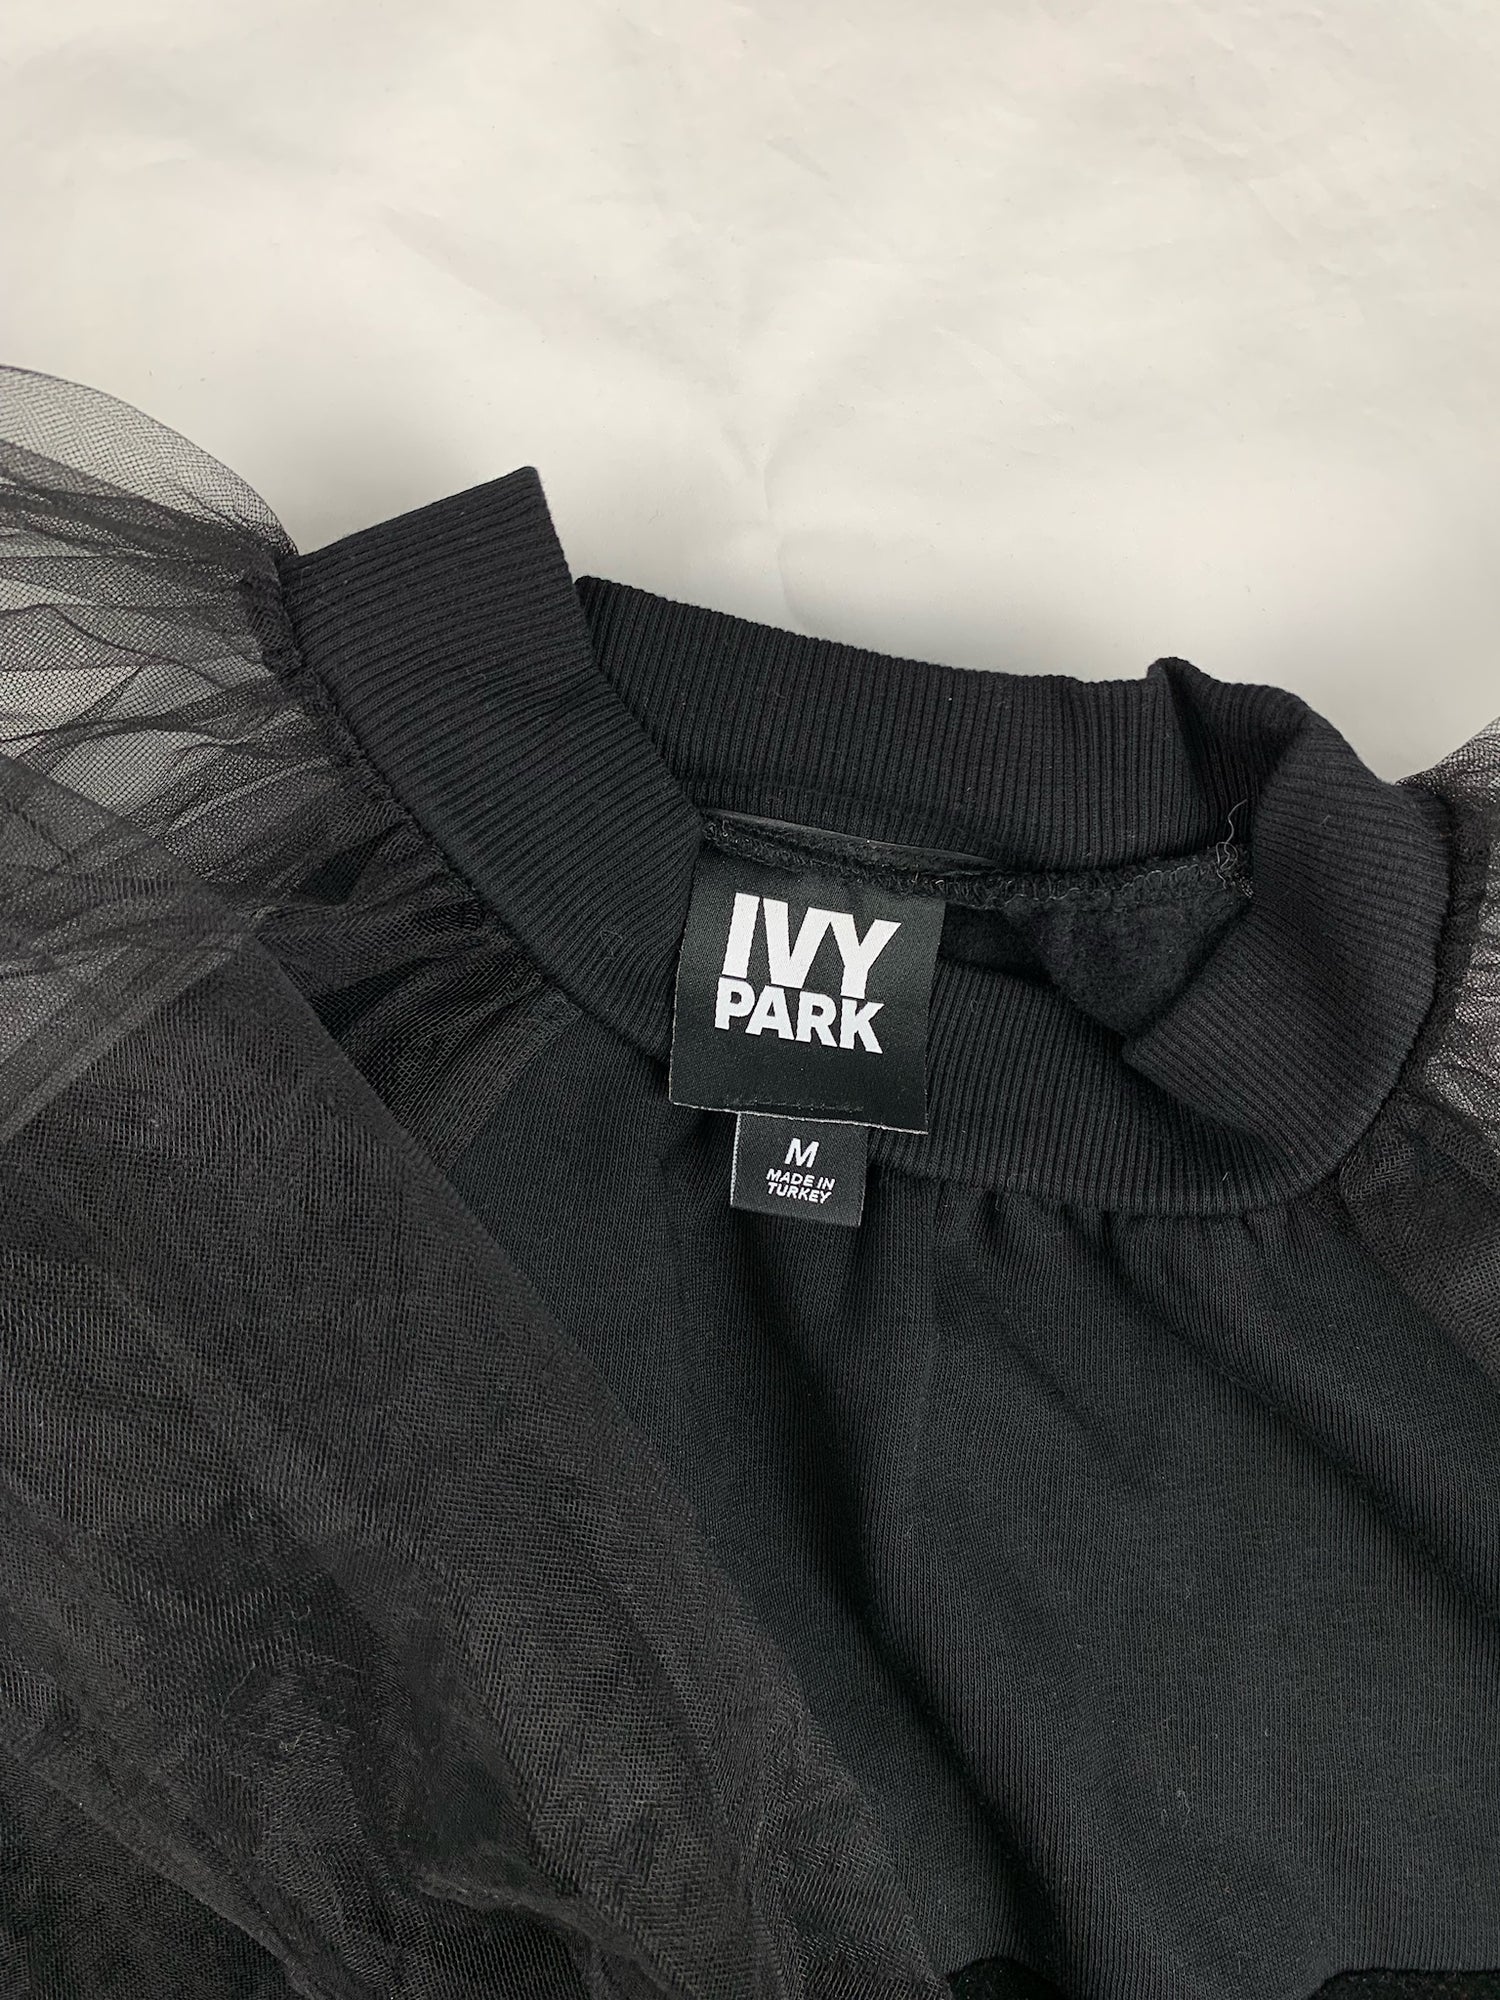 Ivy Park fleece lined and mesh sleeved sweater